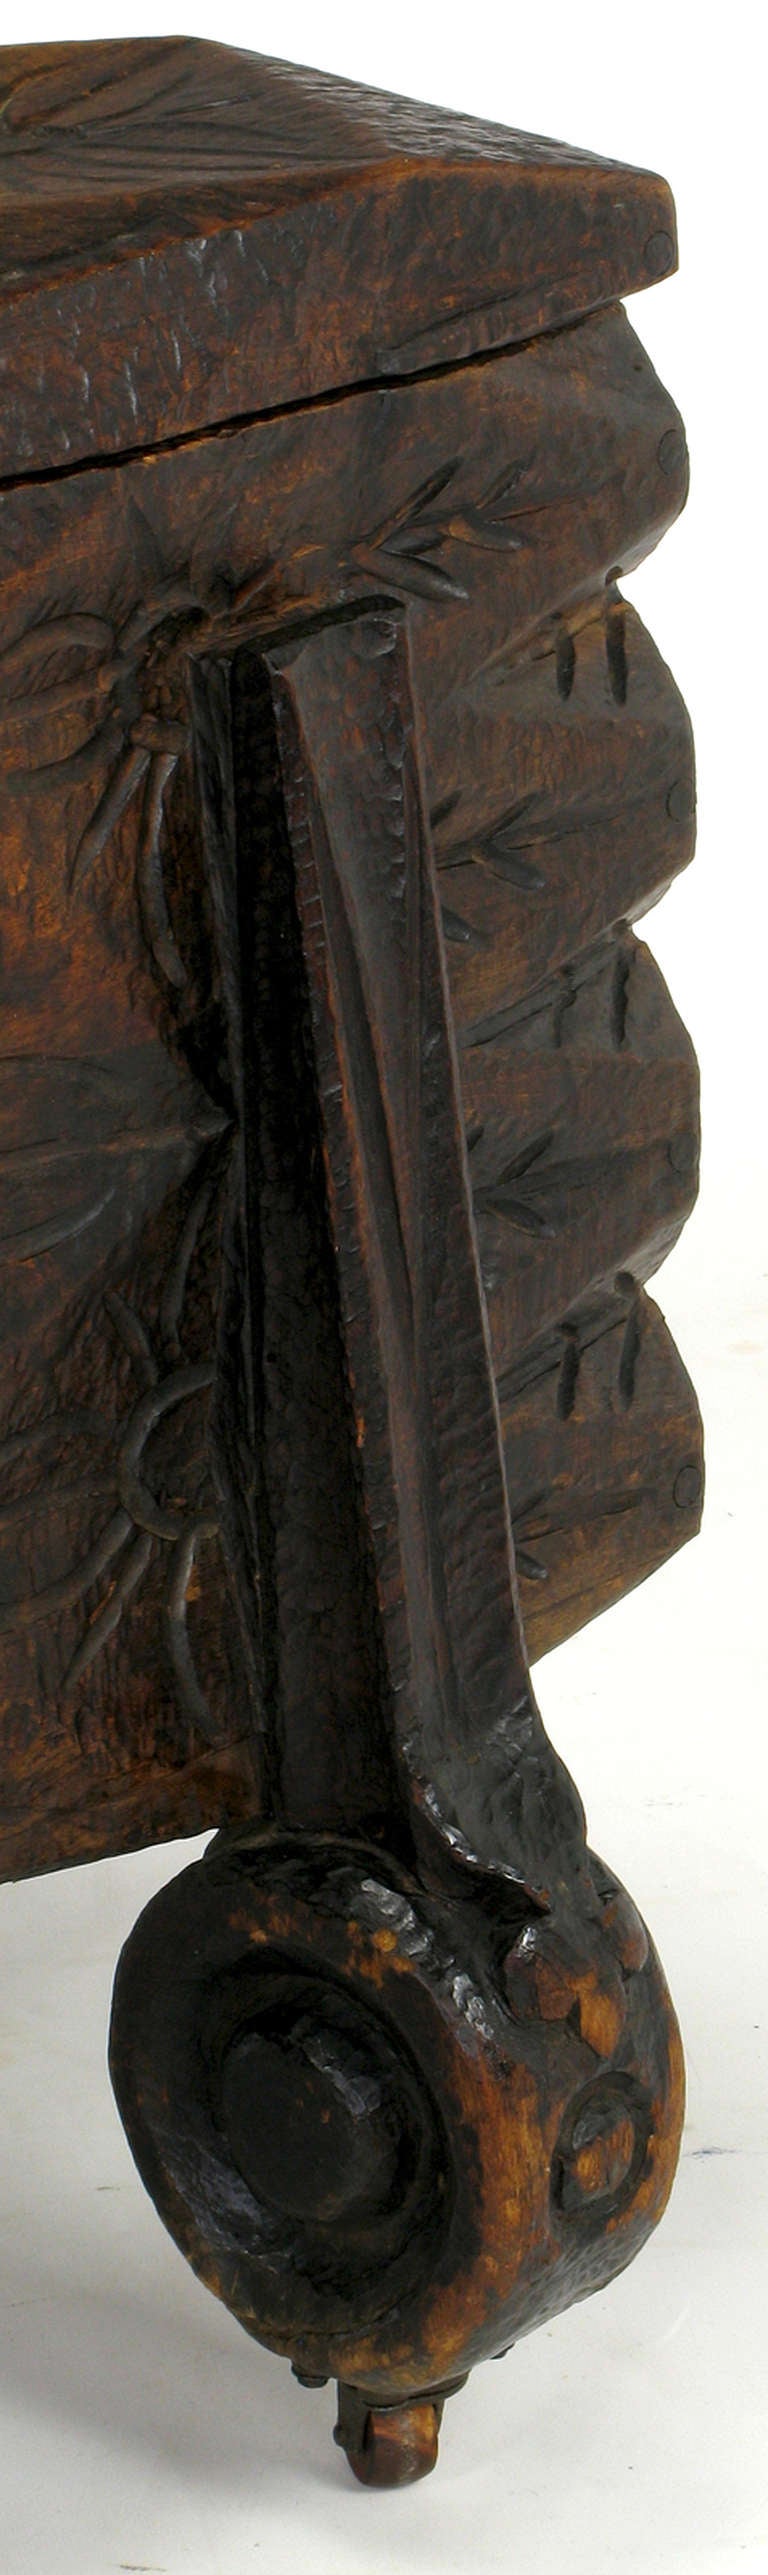 Large Heavily Carved Spanish Style Trunk on Legs 2